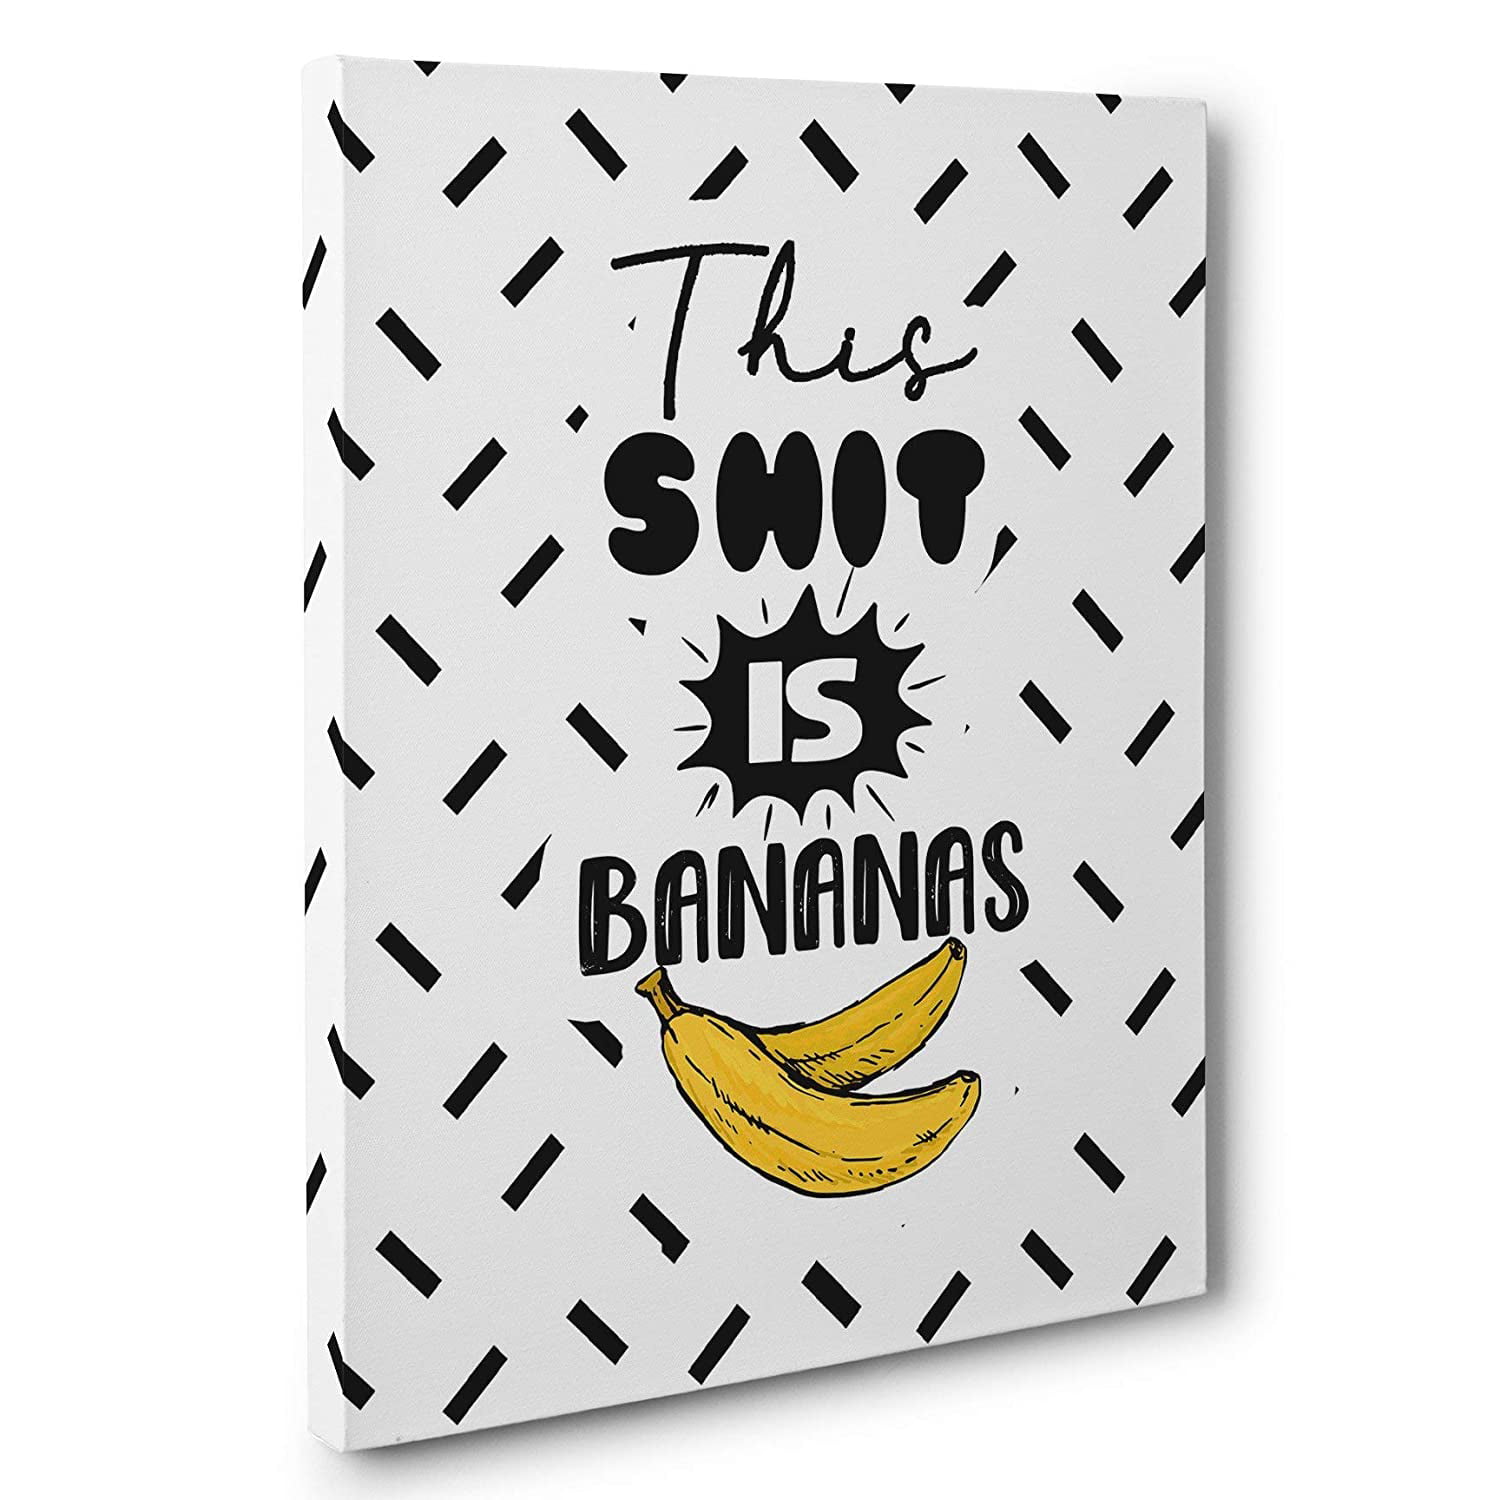 This Shit is Bananas Poster Print Wall Art Black and White Modern Geometric Typography Wall Decor